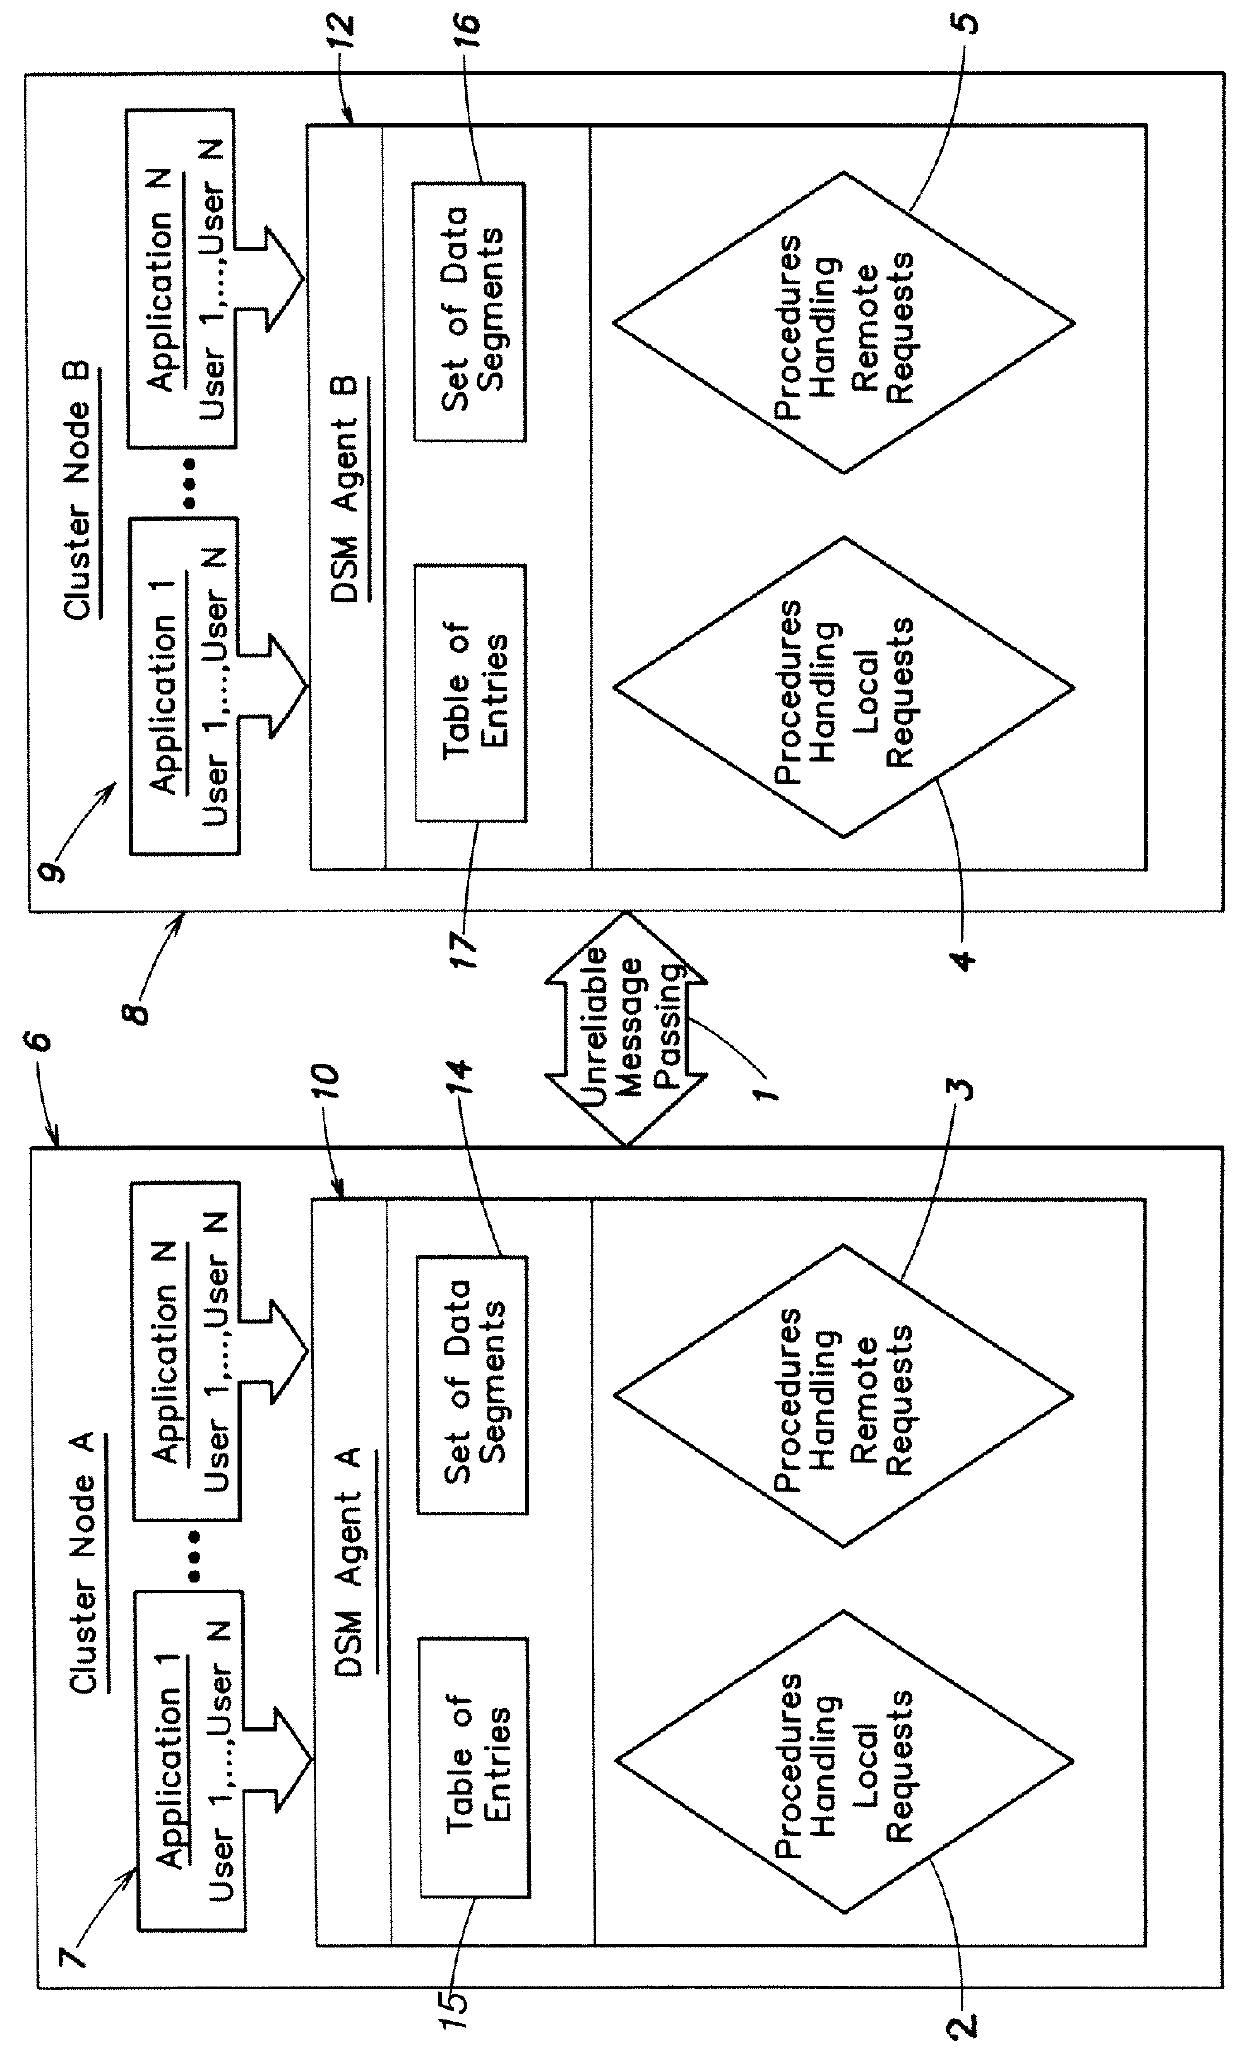 Distributed shared caching for clustered file systems